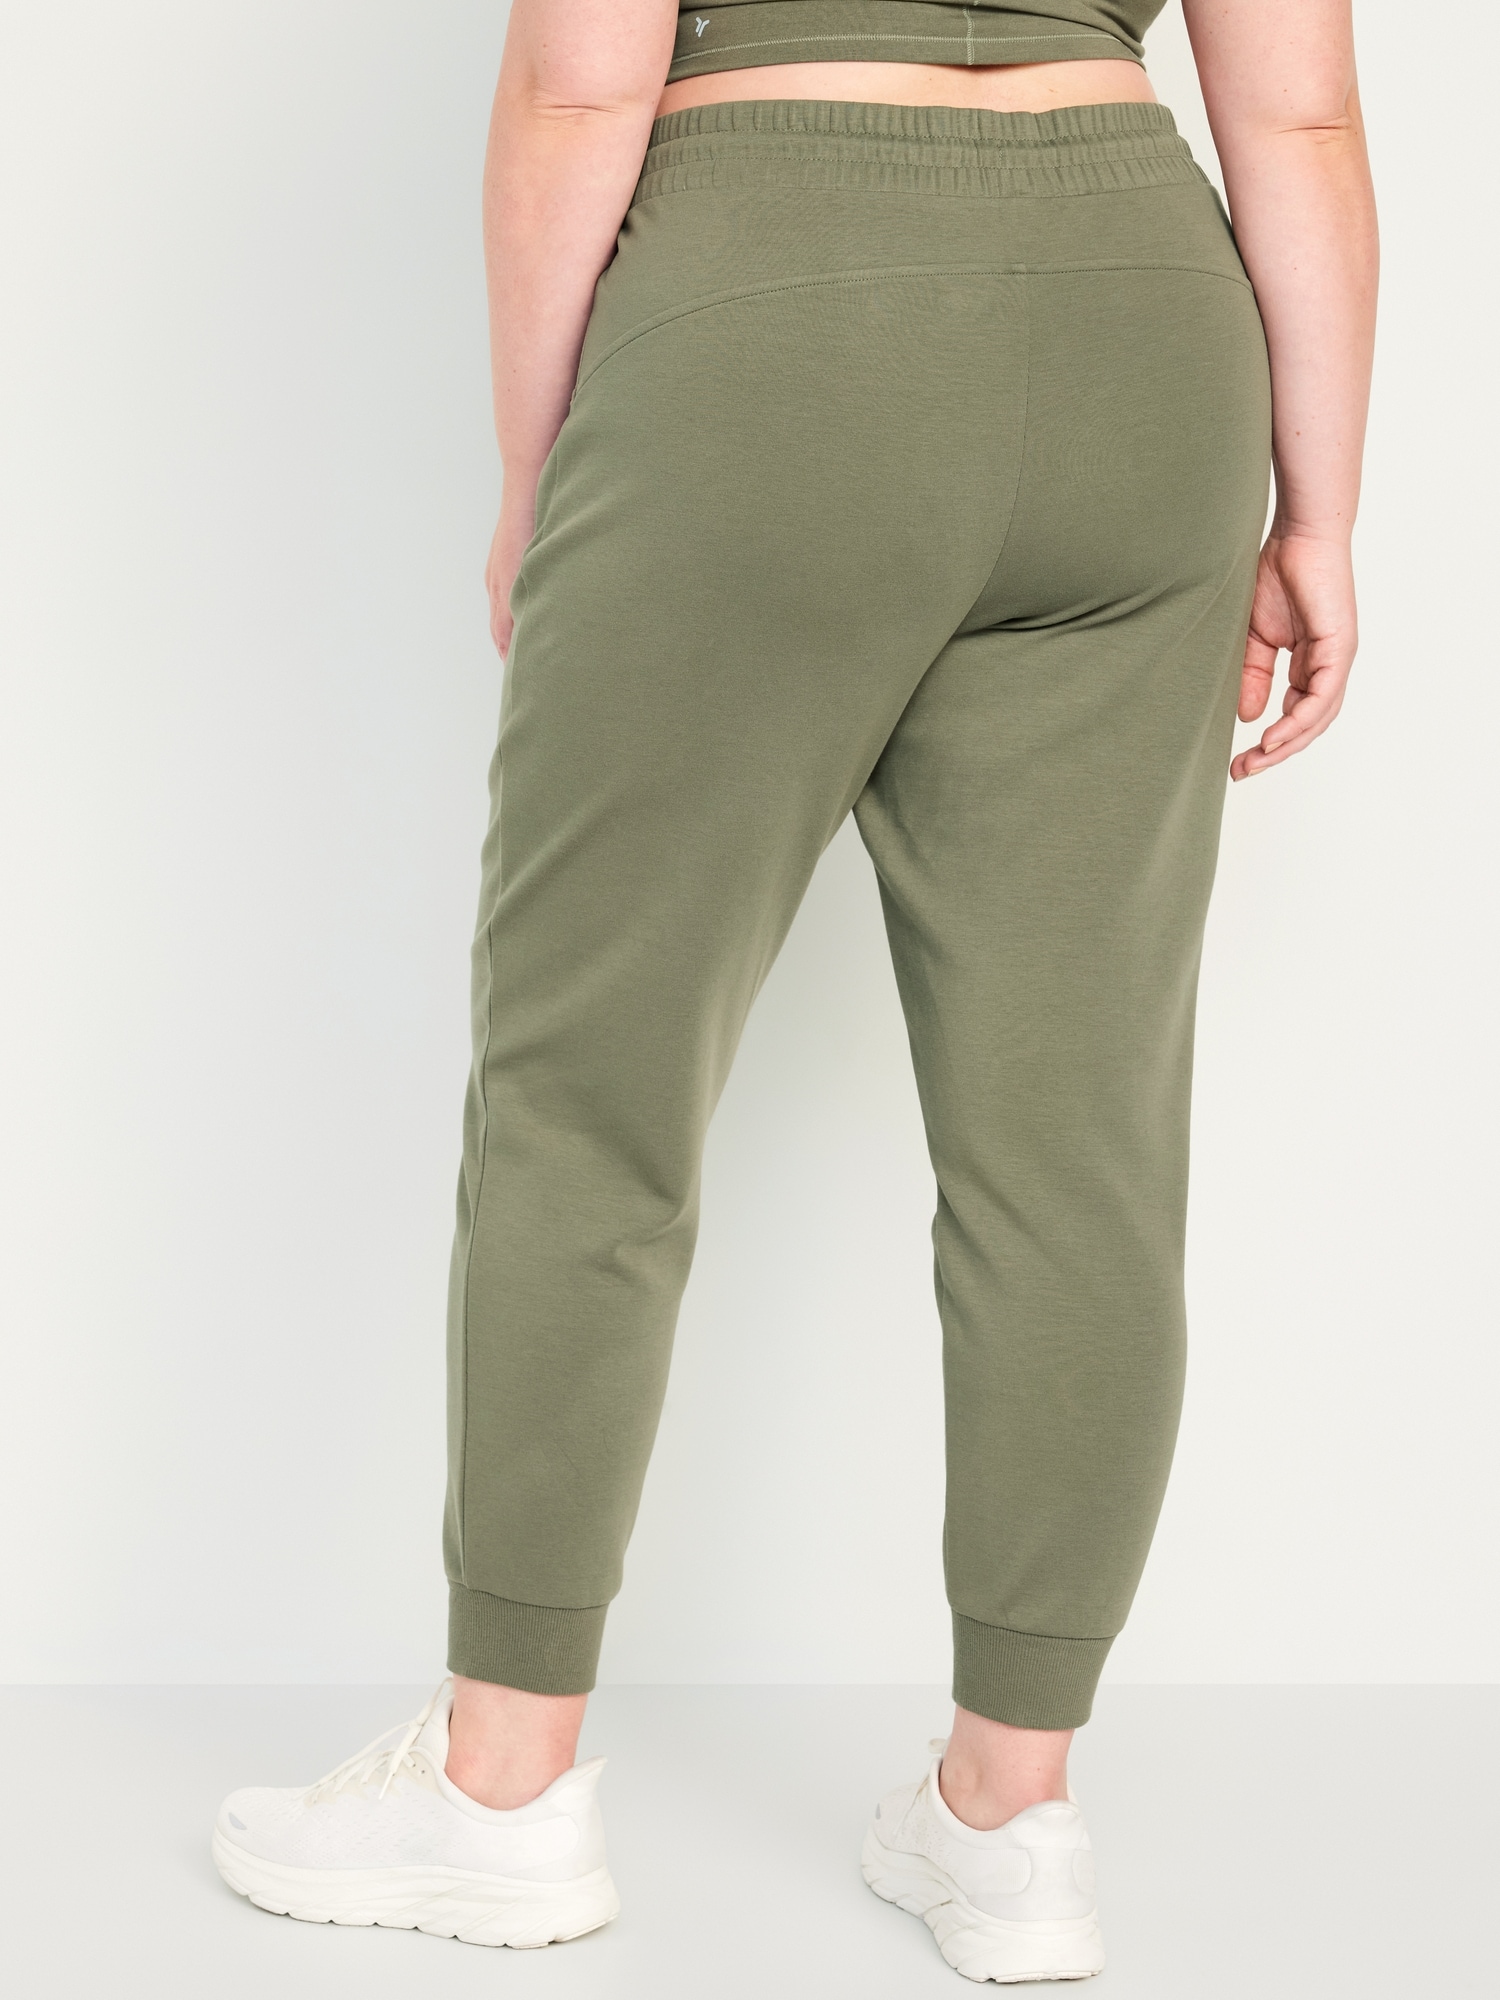 Old Navy Powersoft Joggers Green Size XS - $25 (58% Off Retail